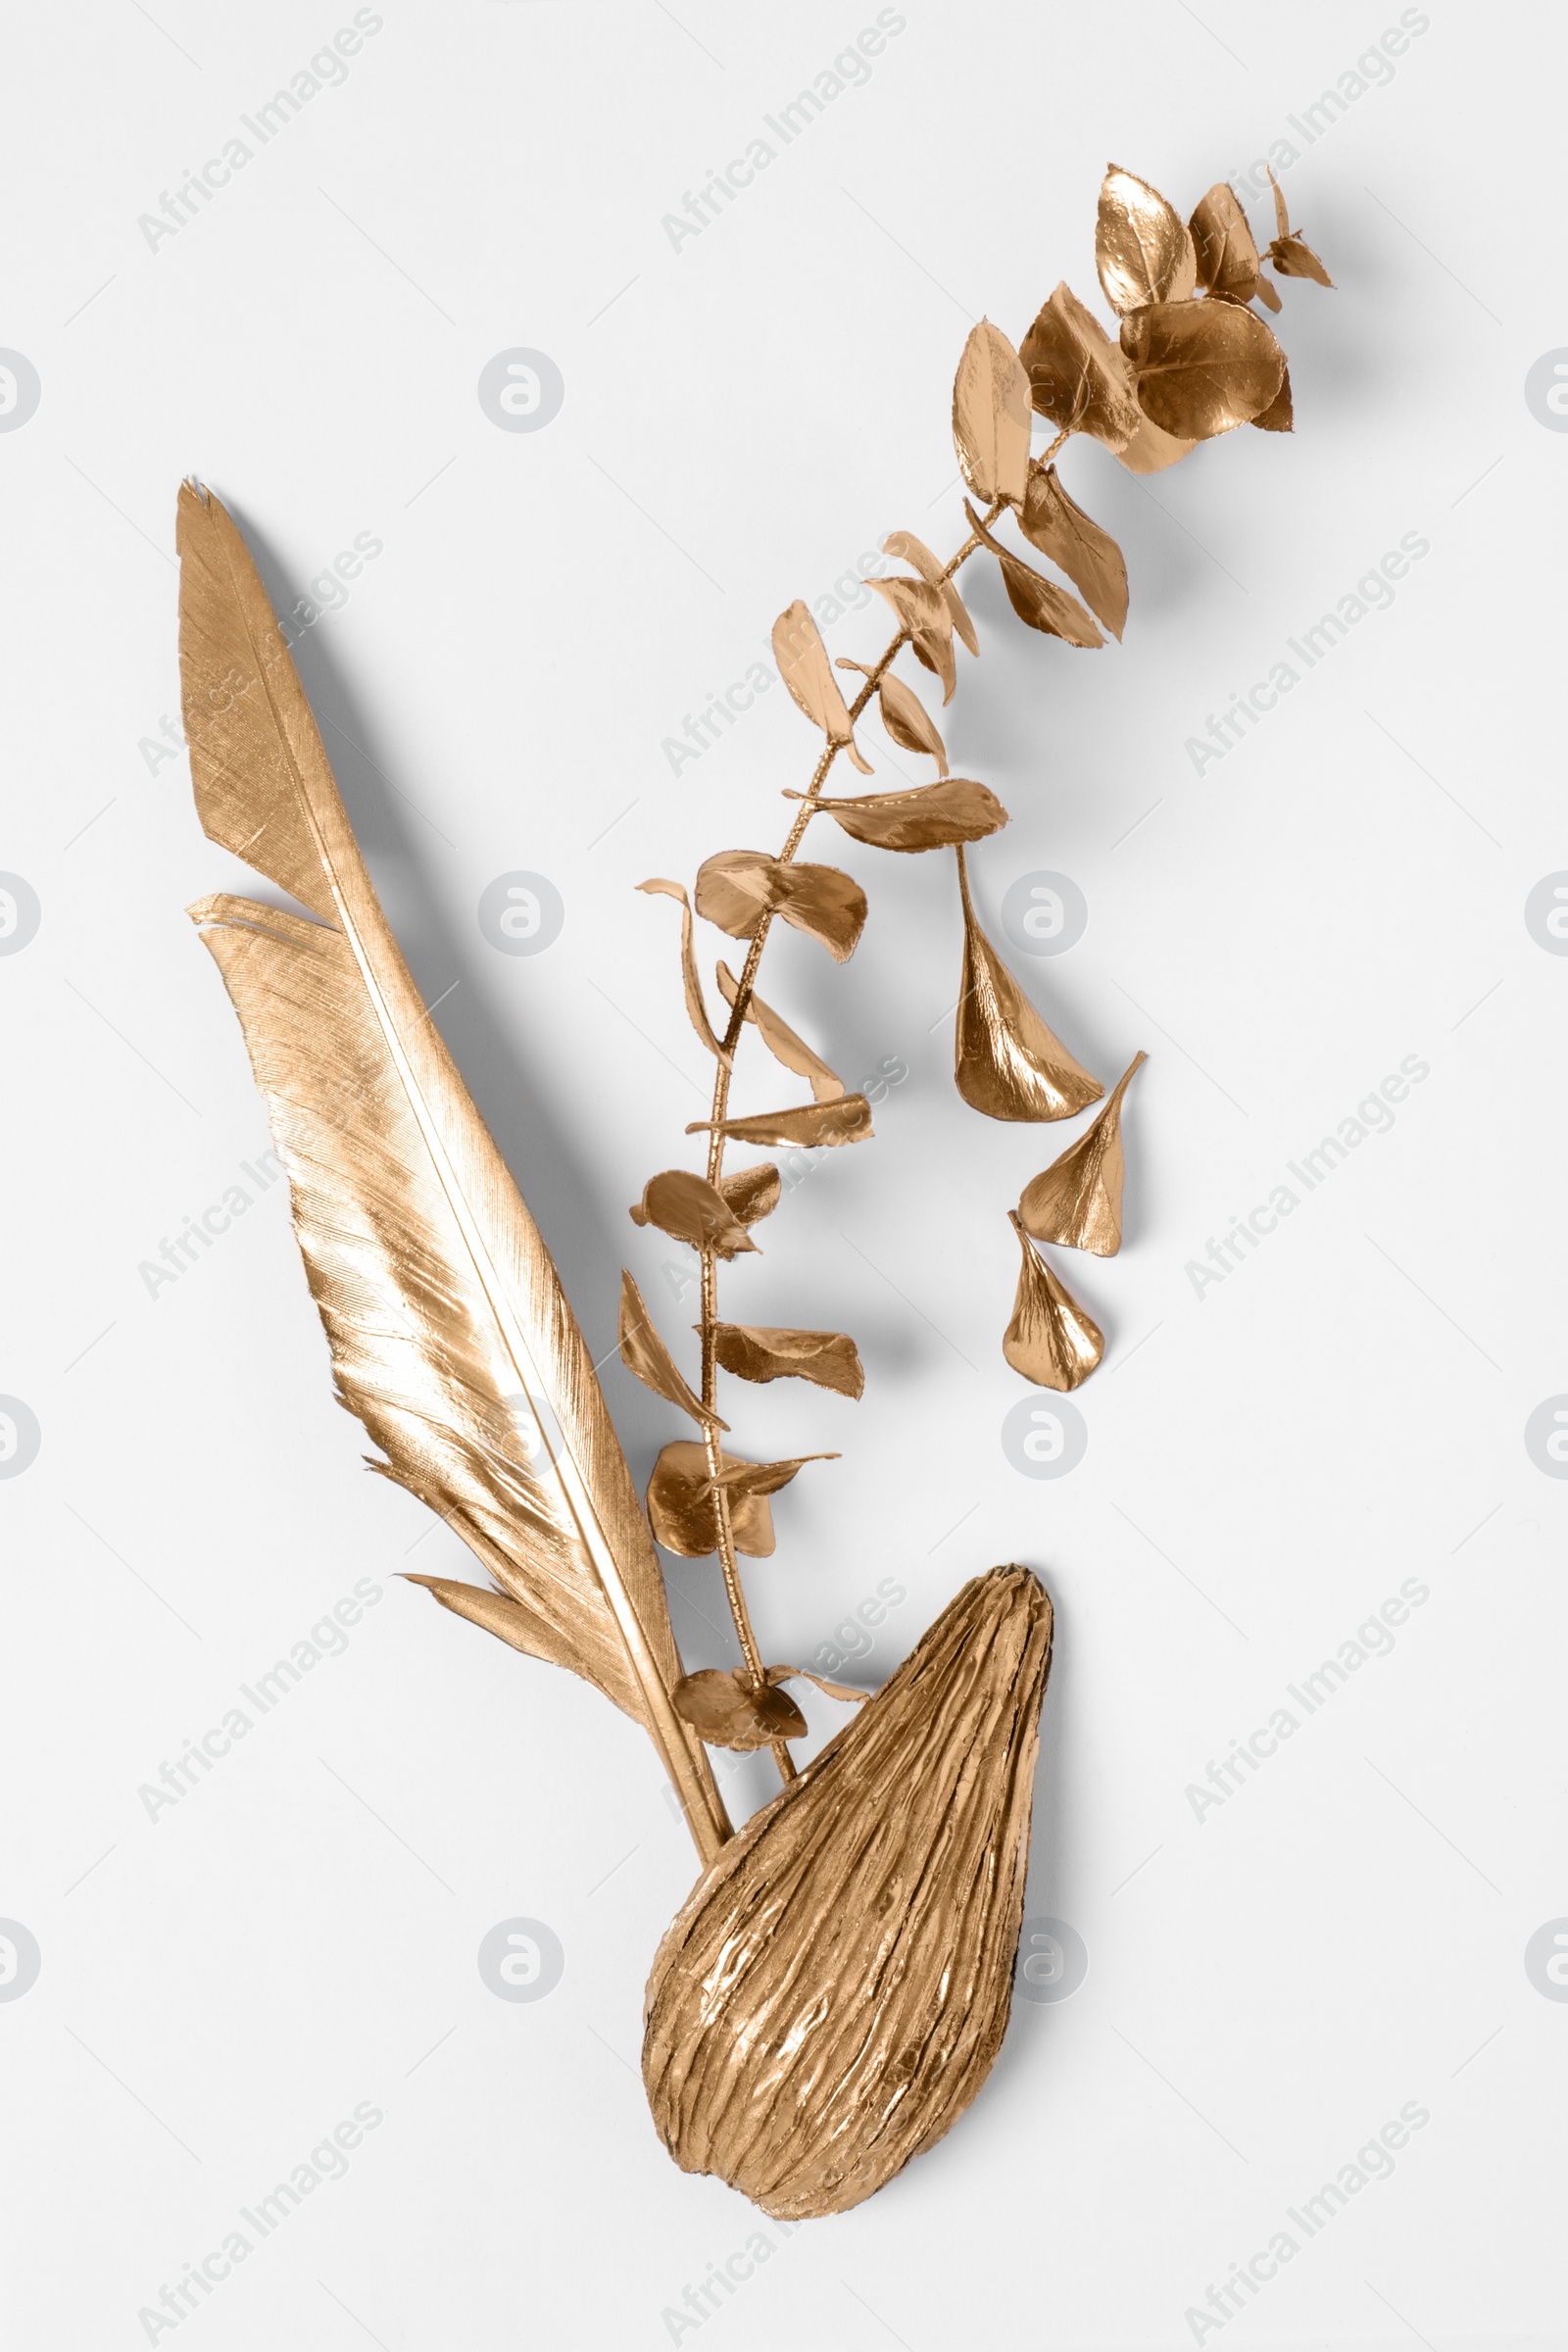 Photo of Shiny stylish golden half of avocado, branch with leaves and feather on white background, flat lay. Decor elements